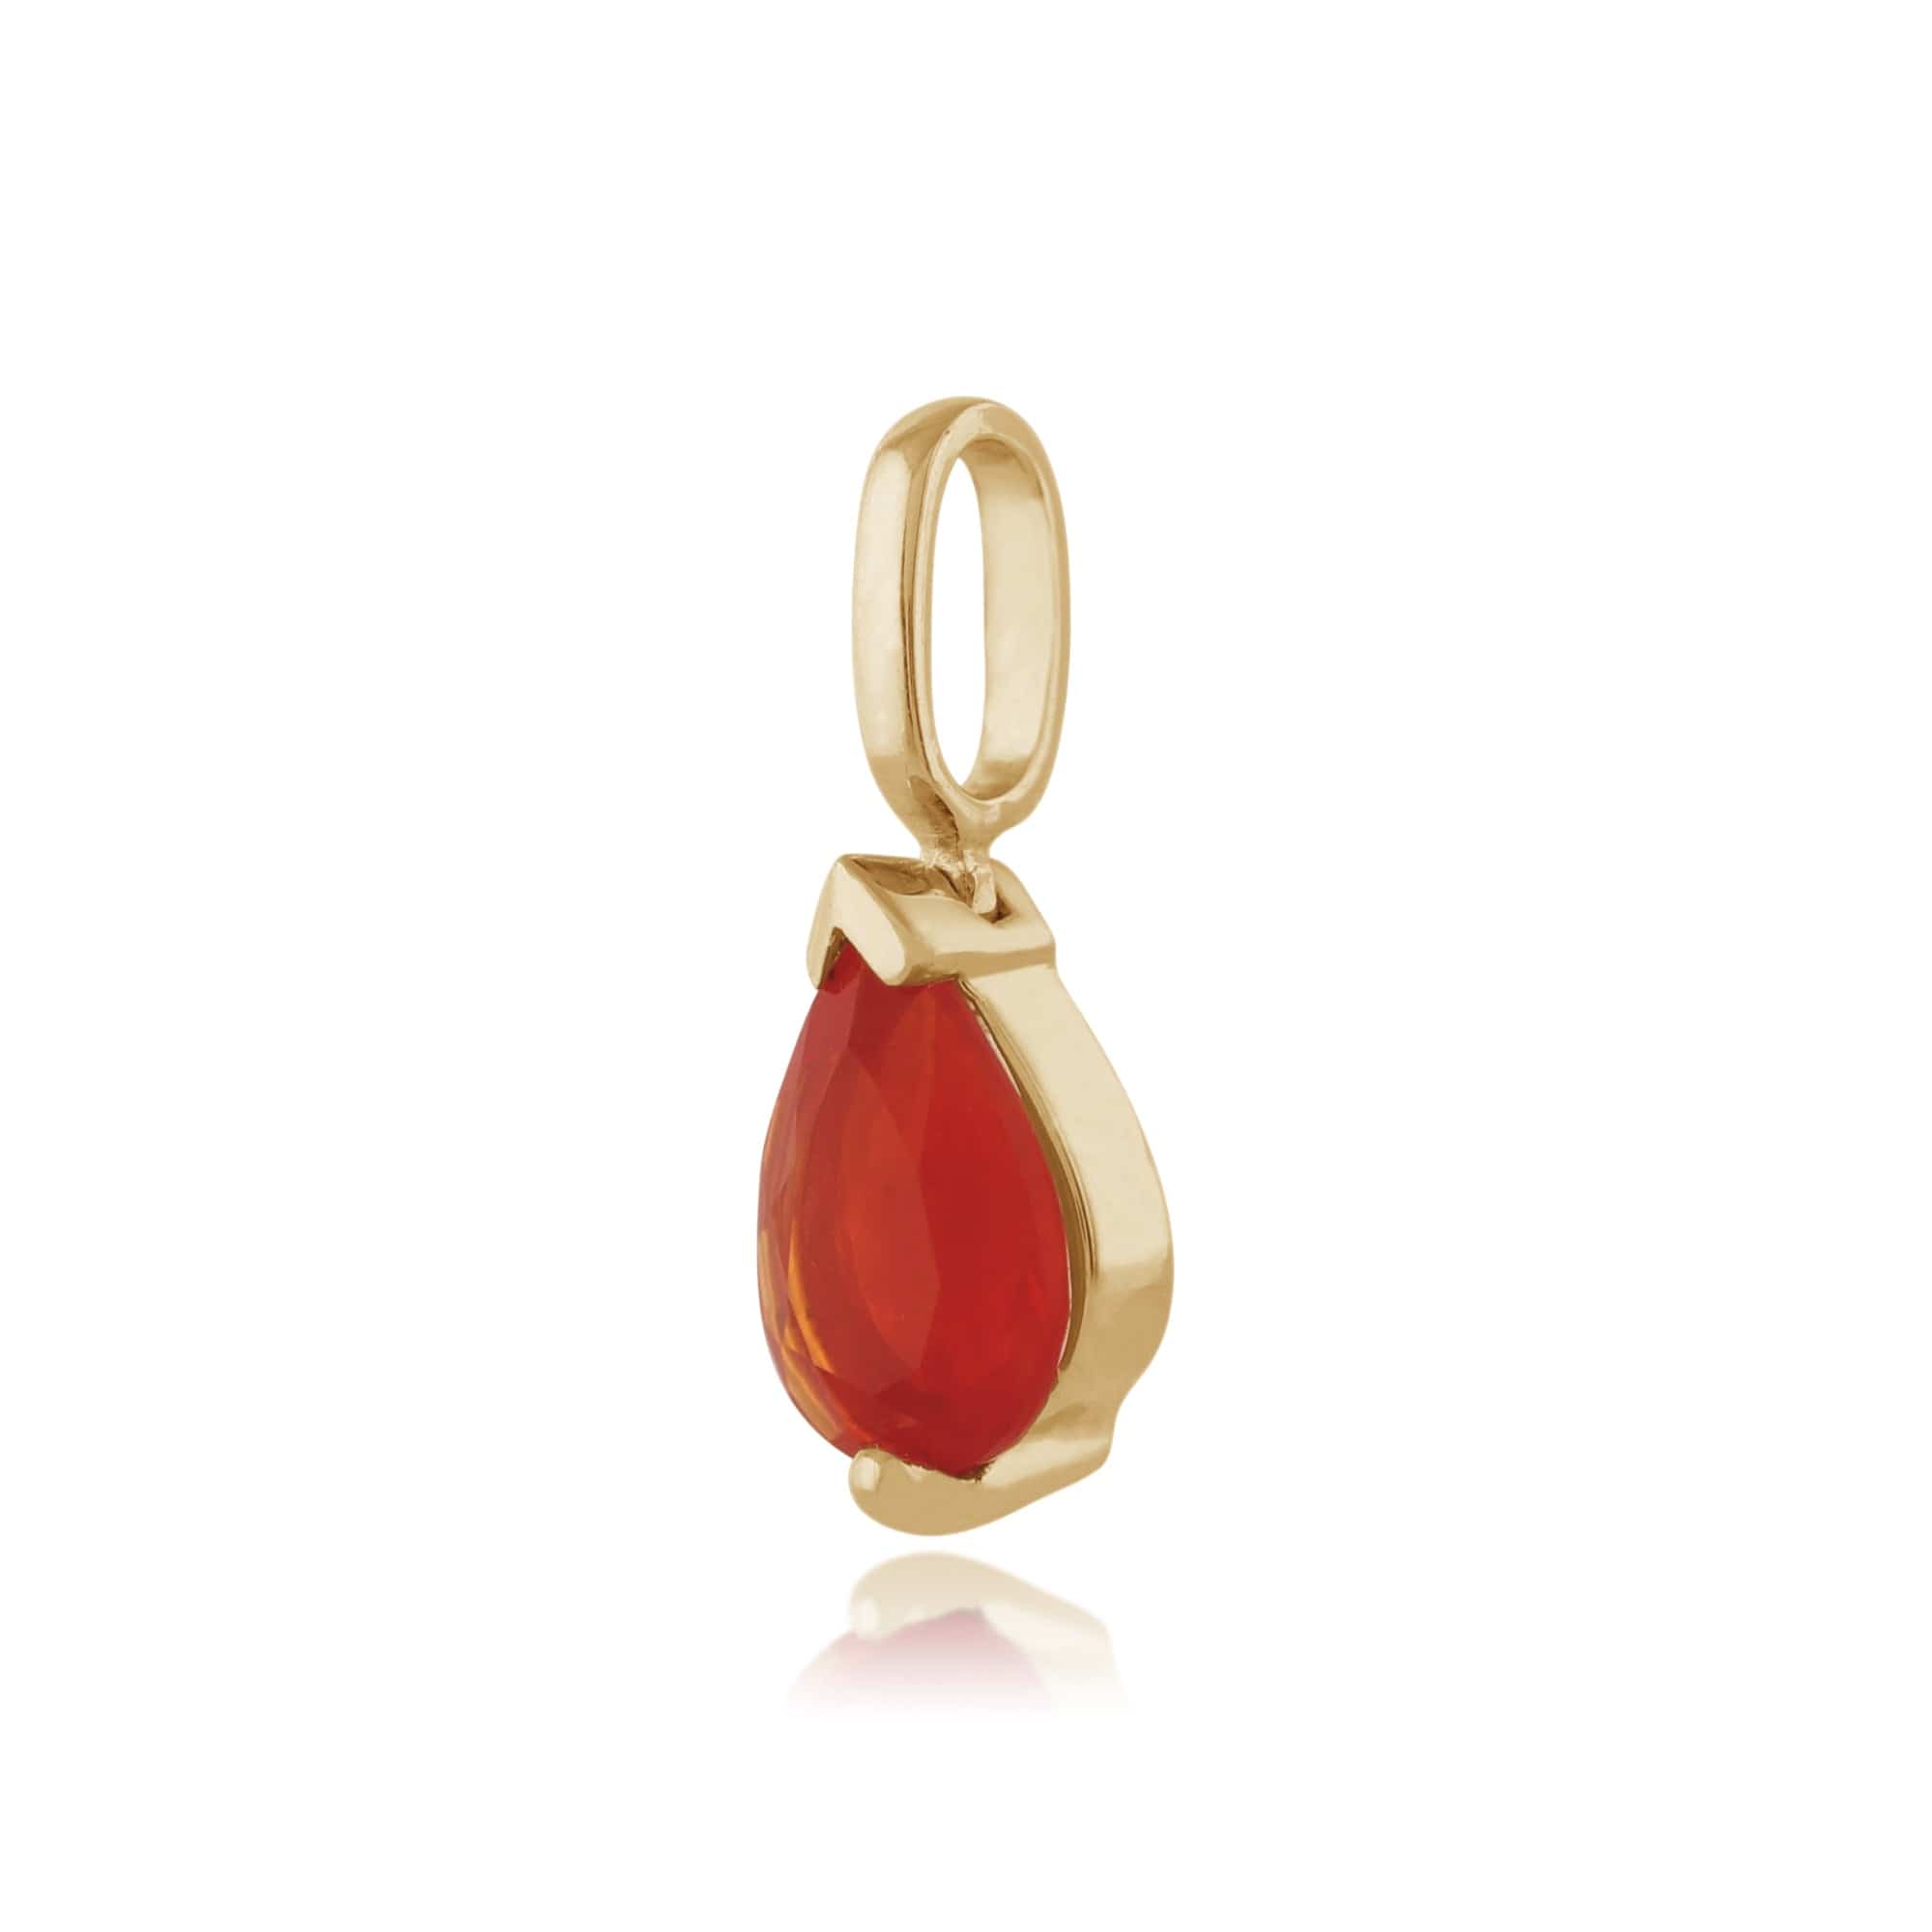 123P0117239 Classic Pear Fire Opal Pendant in 9ct Yellow Gold 2